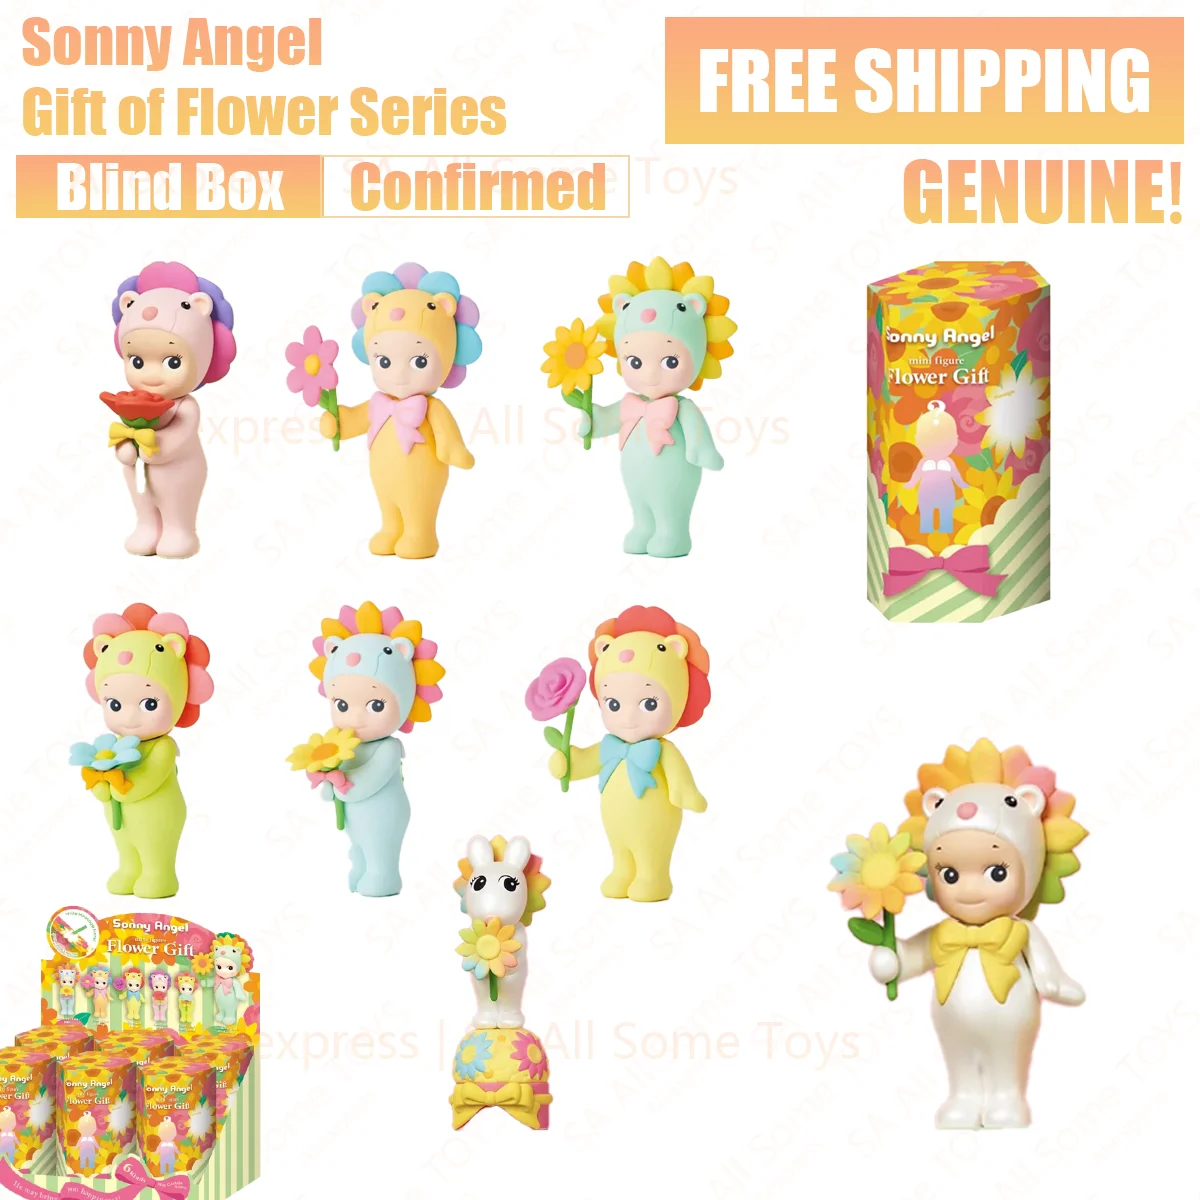 

Sonny Angel Gift of Flower Series Blind Box Confirmed style Genuine telephone Screen Decoration Birthday Gift Mysterious Surpris